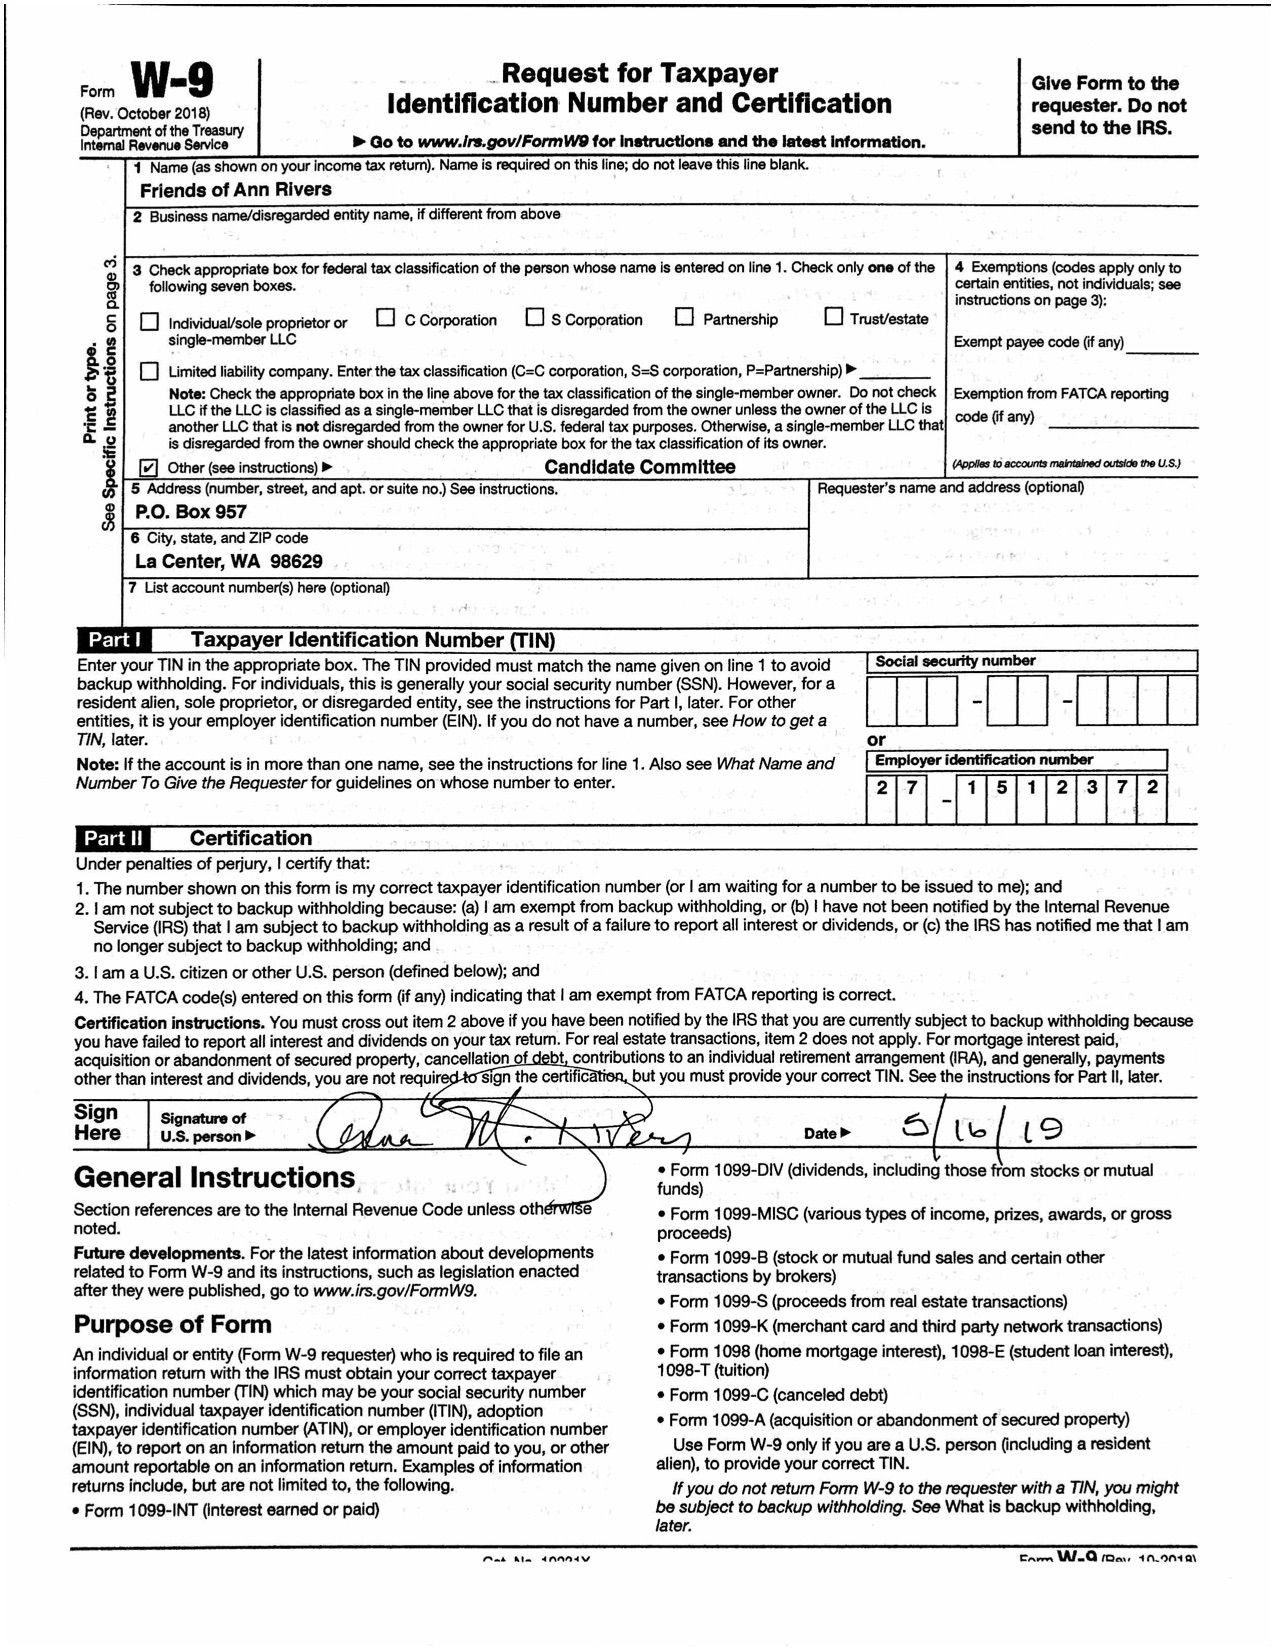 W9 Forms 2021 Printable | Tax Forms, Irs Forms, Calendar-2021 Blank W 9 Form